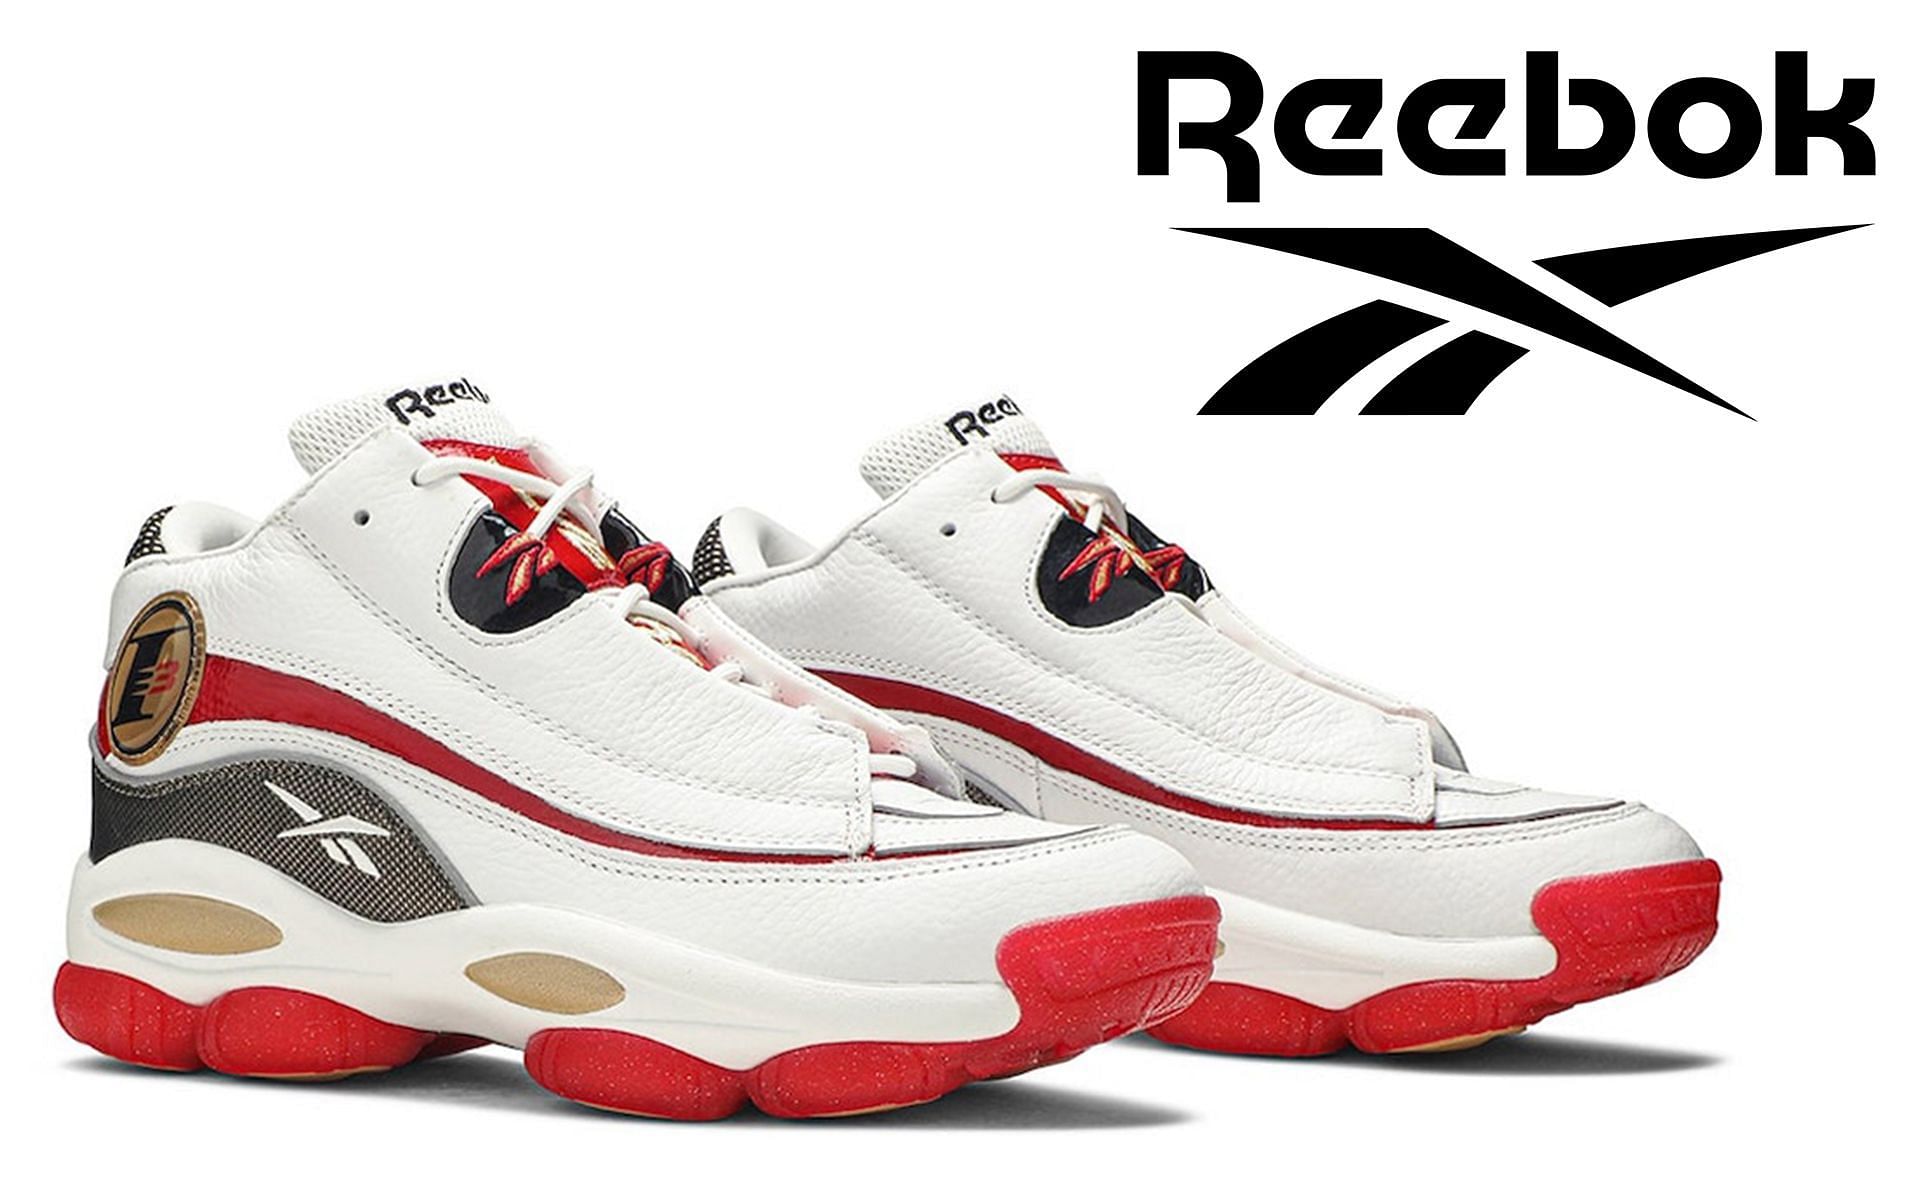 Reebok Answer 1 OG Red and White colorway (Image via Reebok)